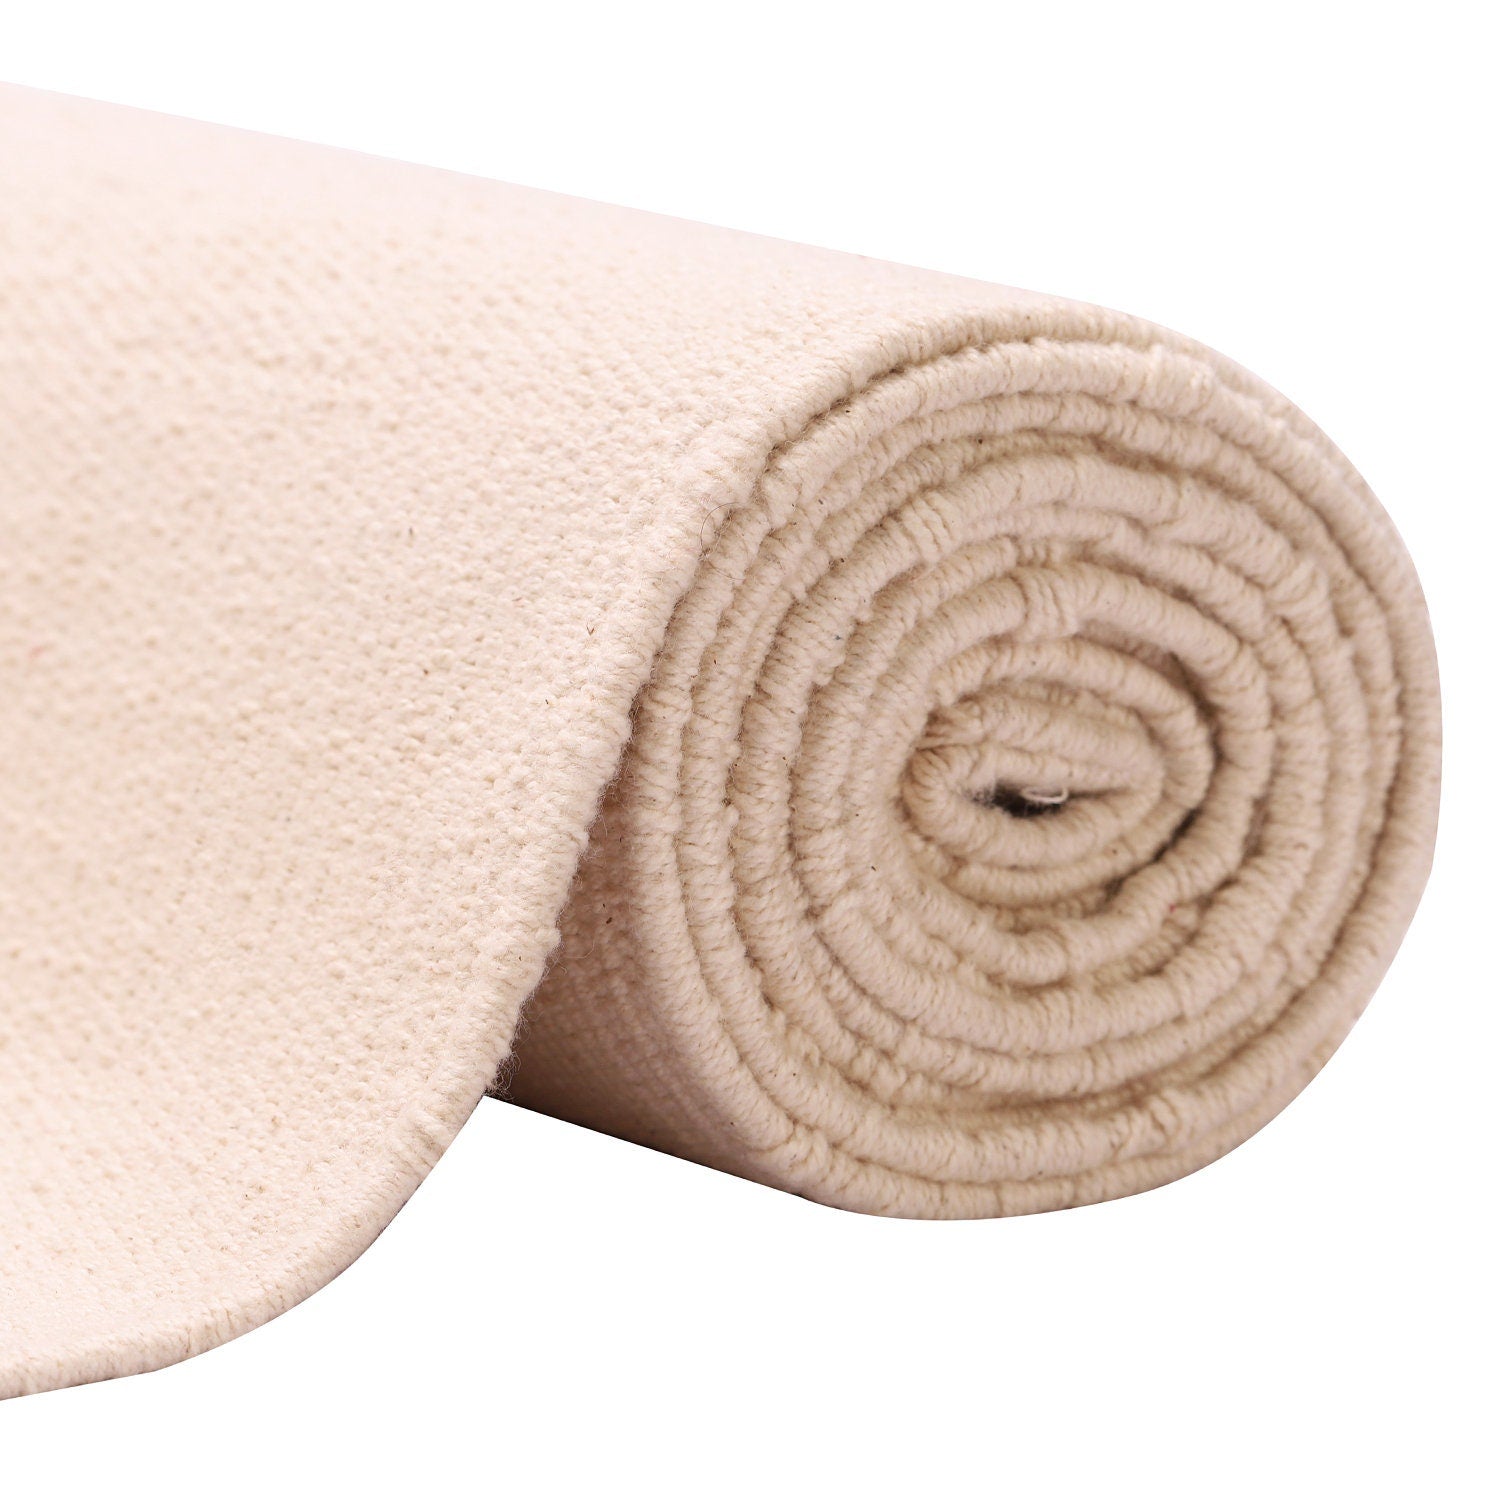 Organic Cotton Yoga Mat - Made only with 100% Organic Cotton!